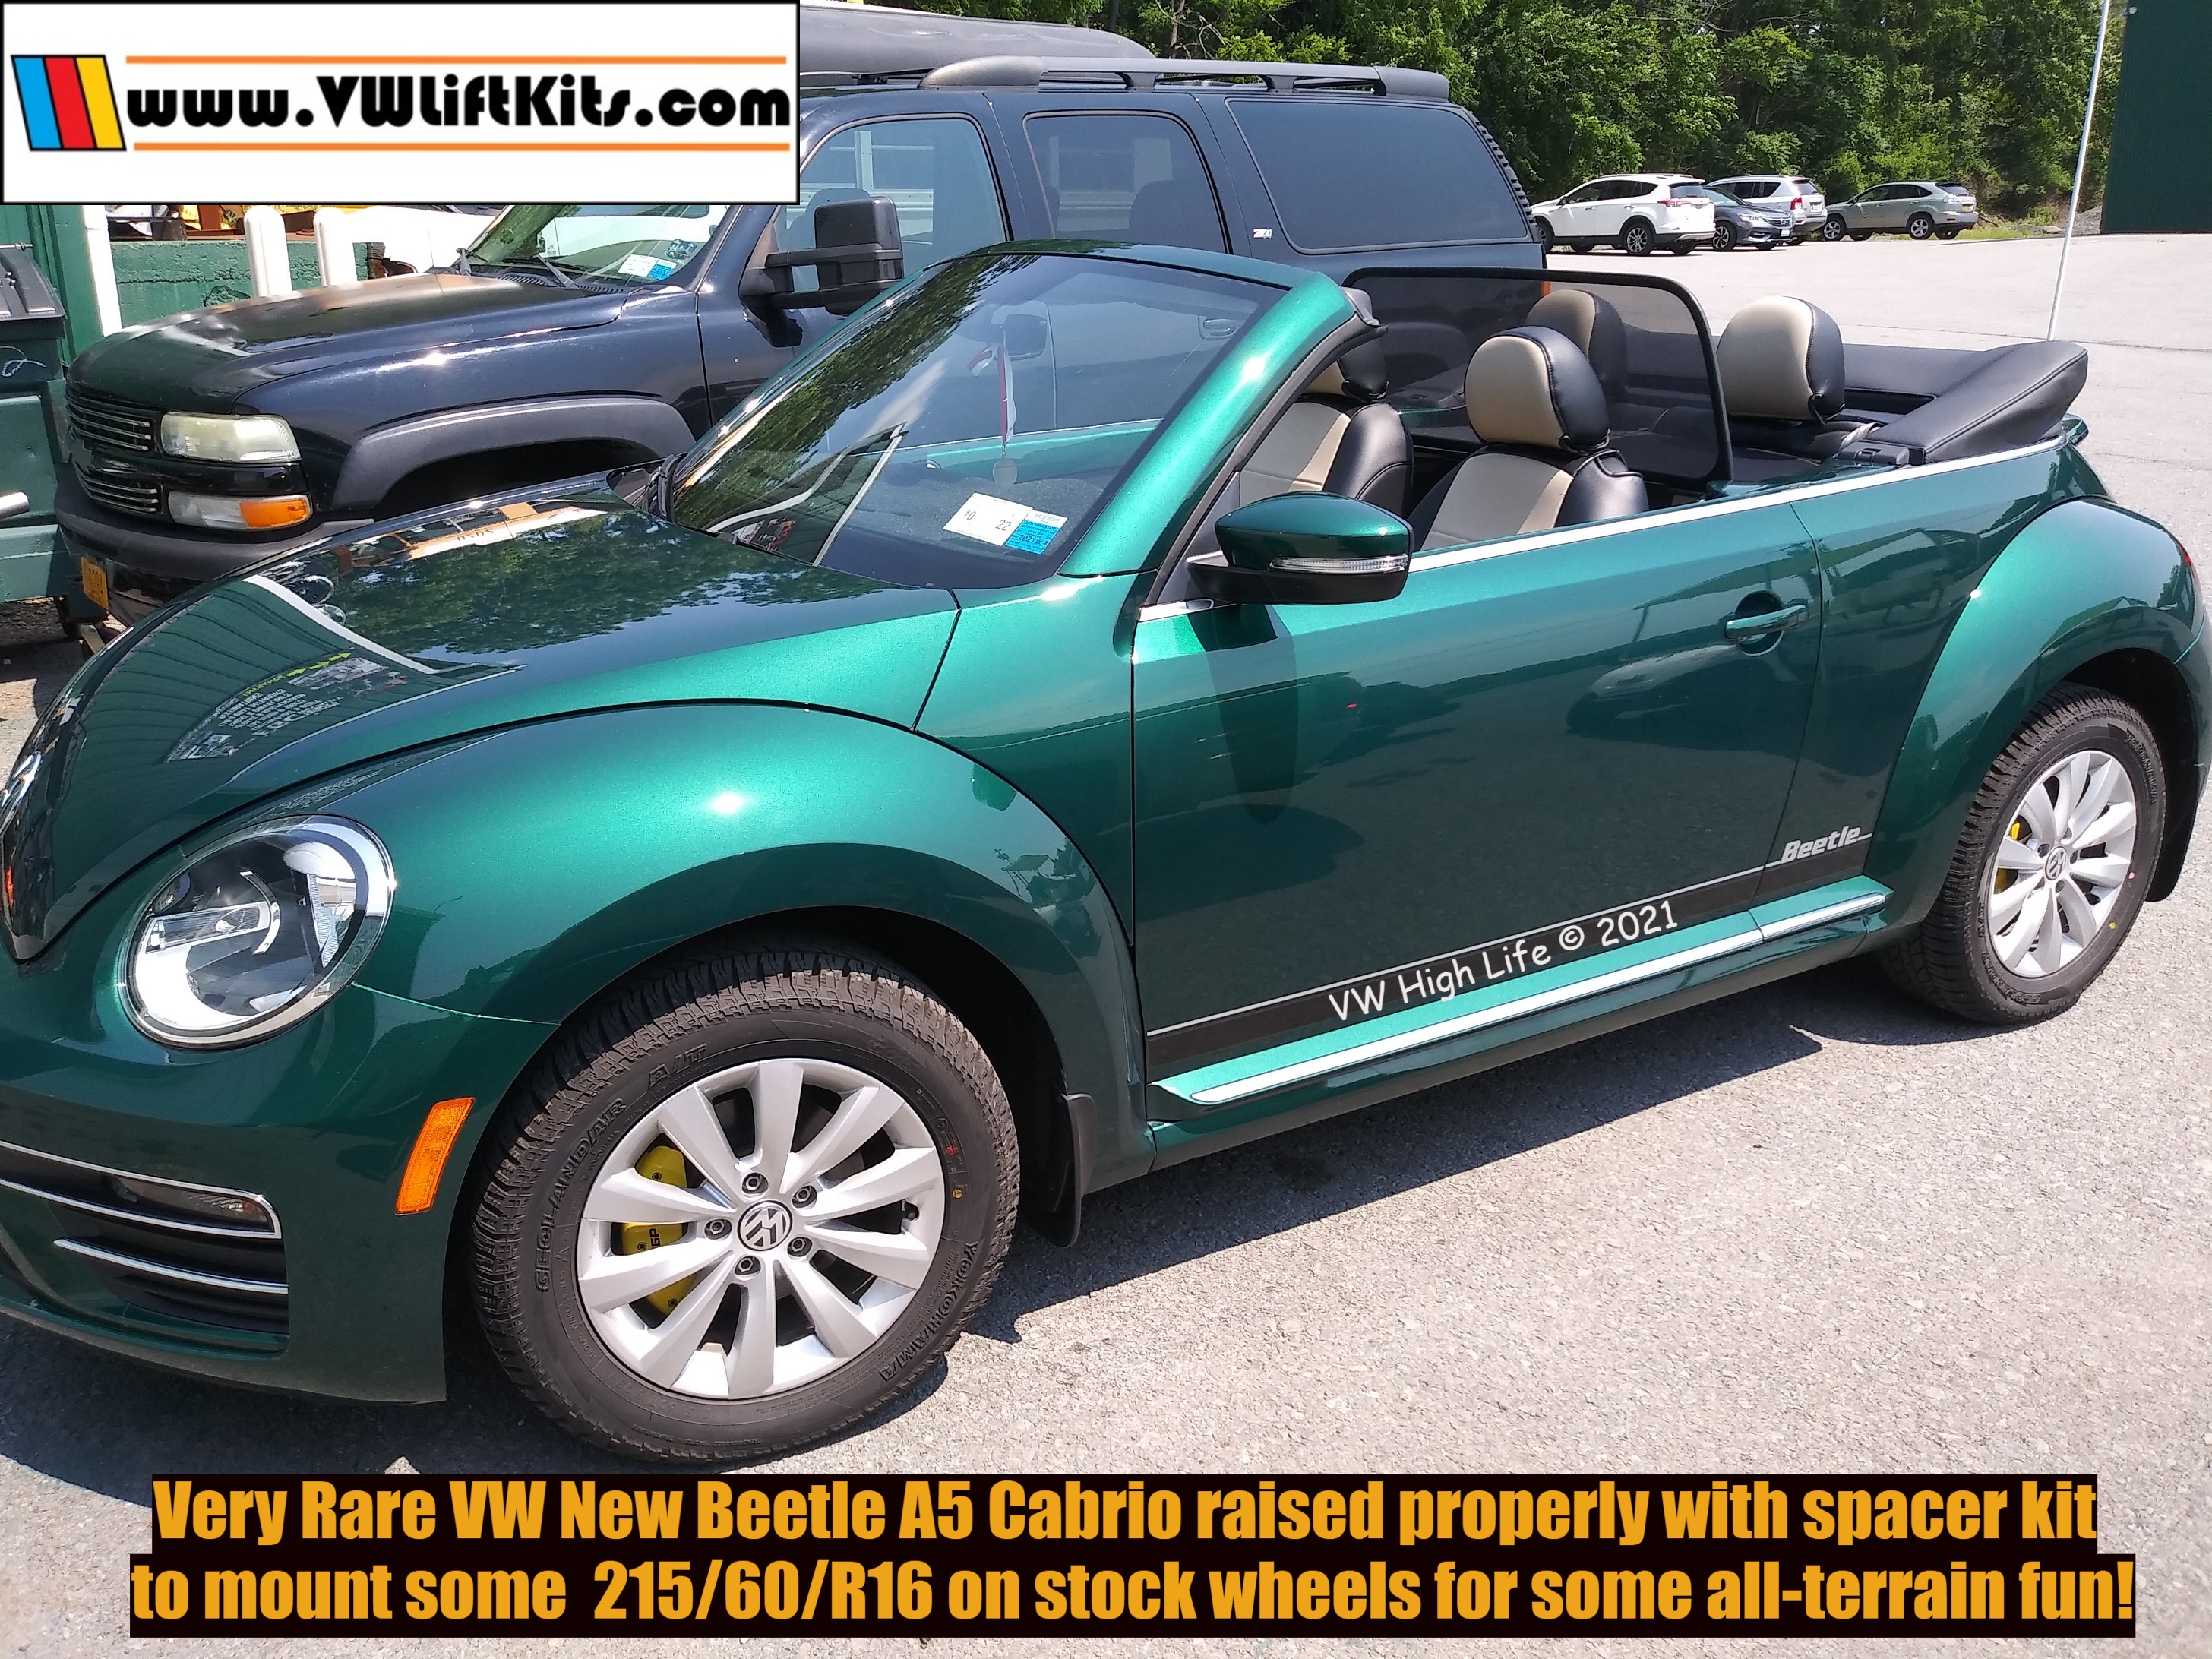 Rare VW New Beetle Convertible properly raised for more ground clearance with larger tires.